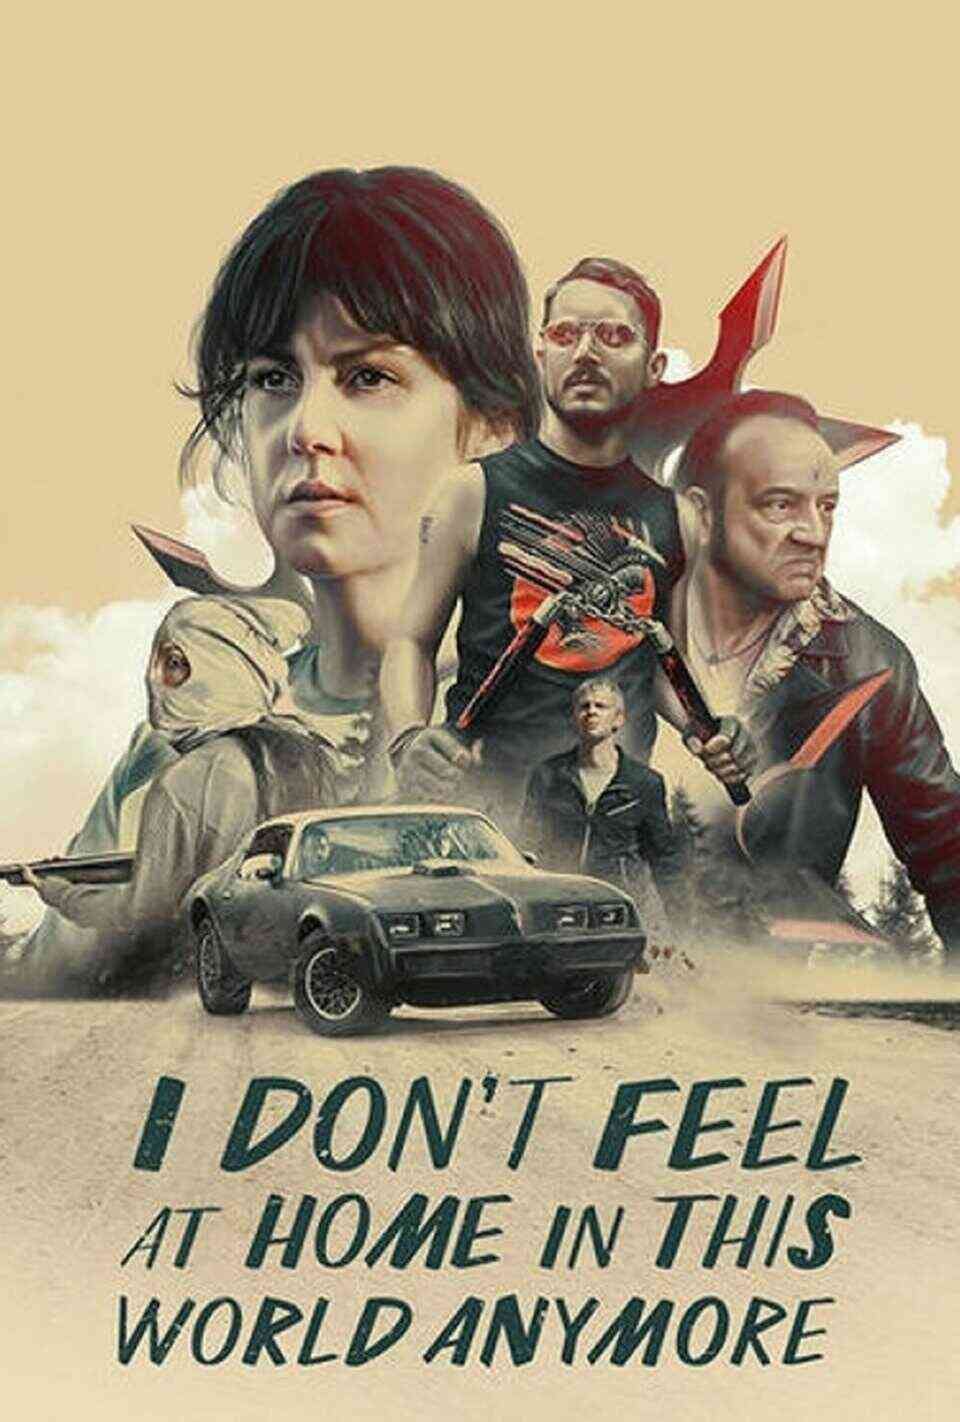 Read I Don't Feel at Home in This World Anymore. screenplay (poster)